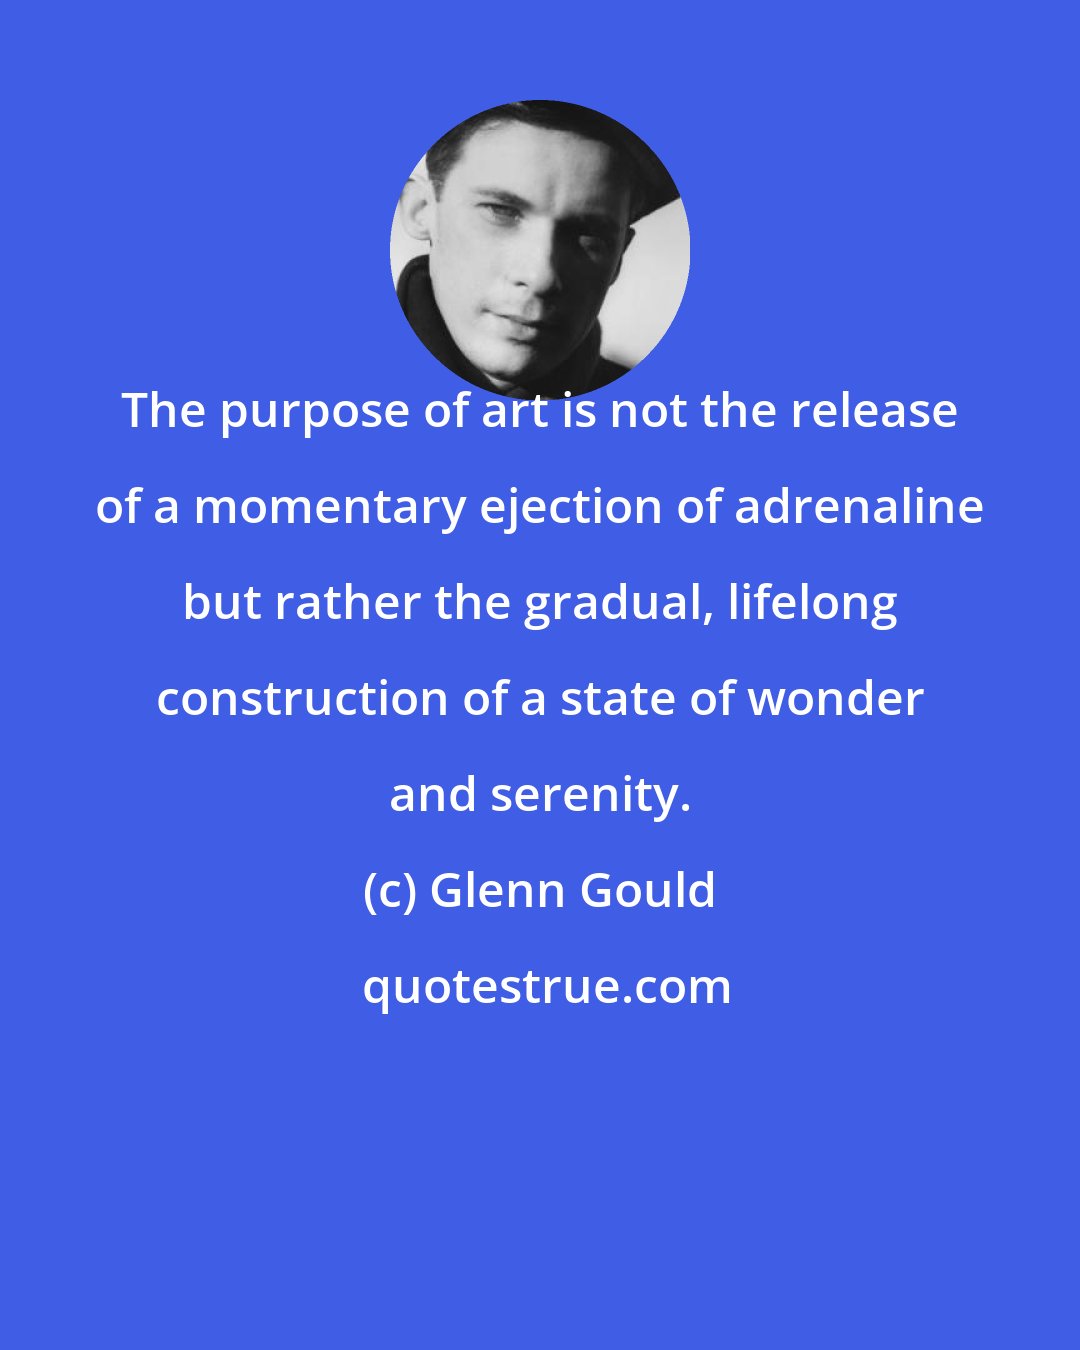 Glenn Gould: The purpose of art is not the release of a momentary ejection of adrenaline but rather the gradual, lifelong construction of a state of wonder and serenity.